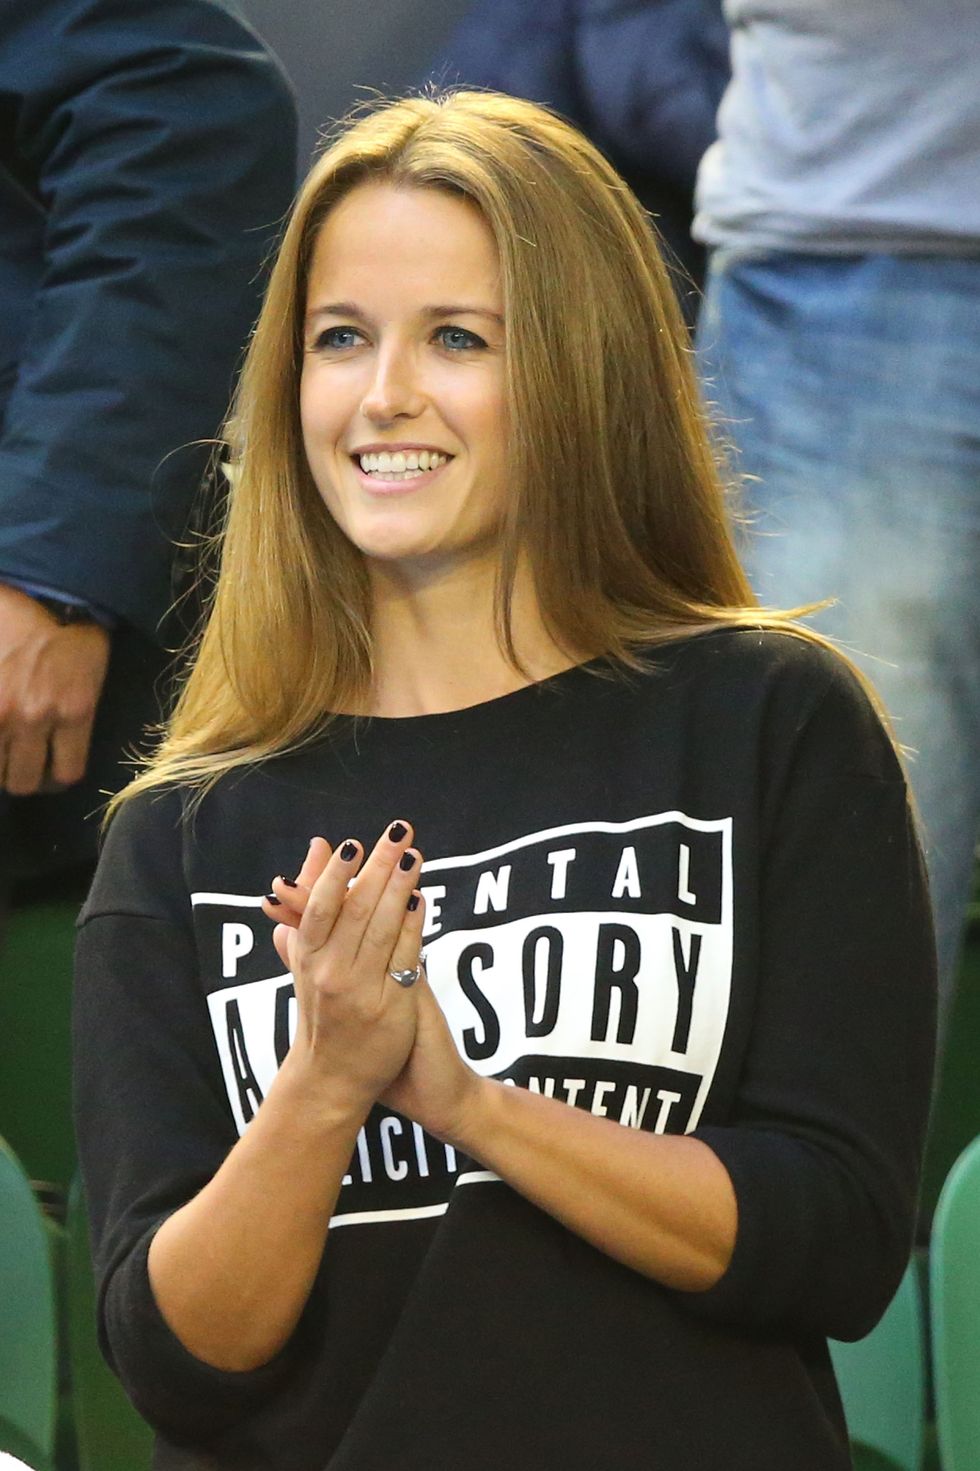 Kim Sears wears an explicit content sweatshirt at the Australian Open's final in response to that swearing controversy.